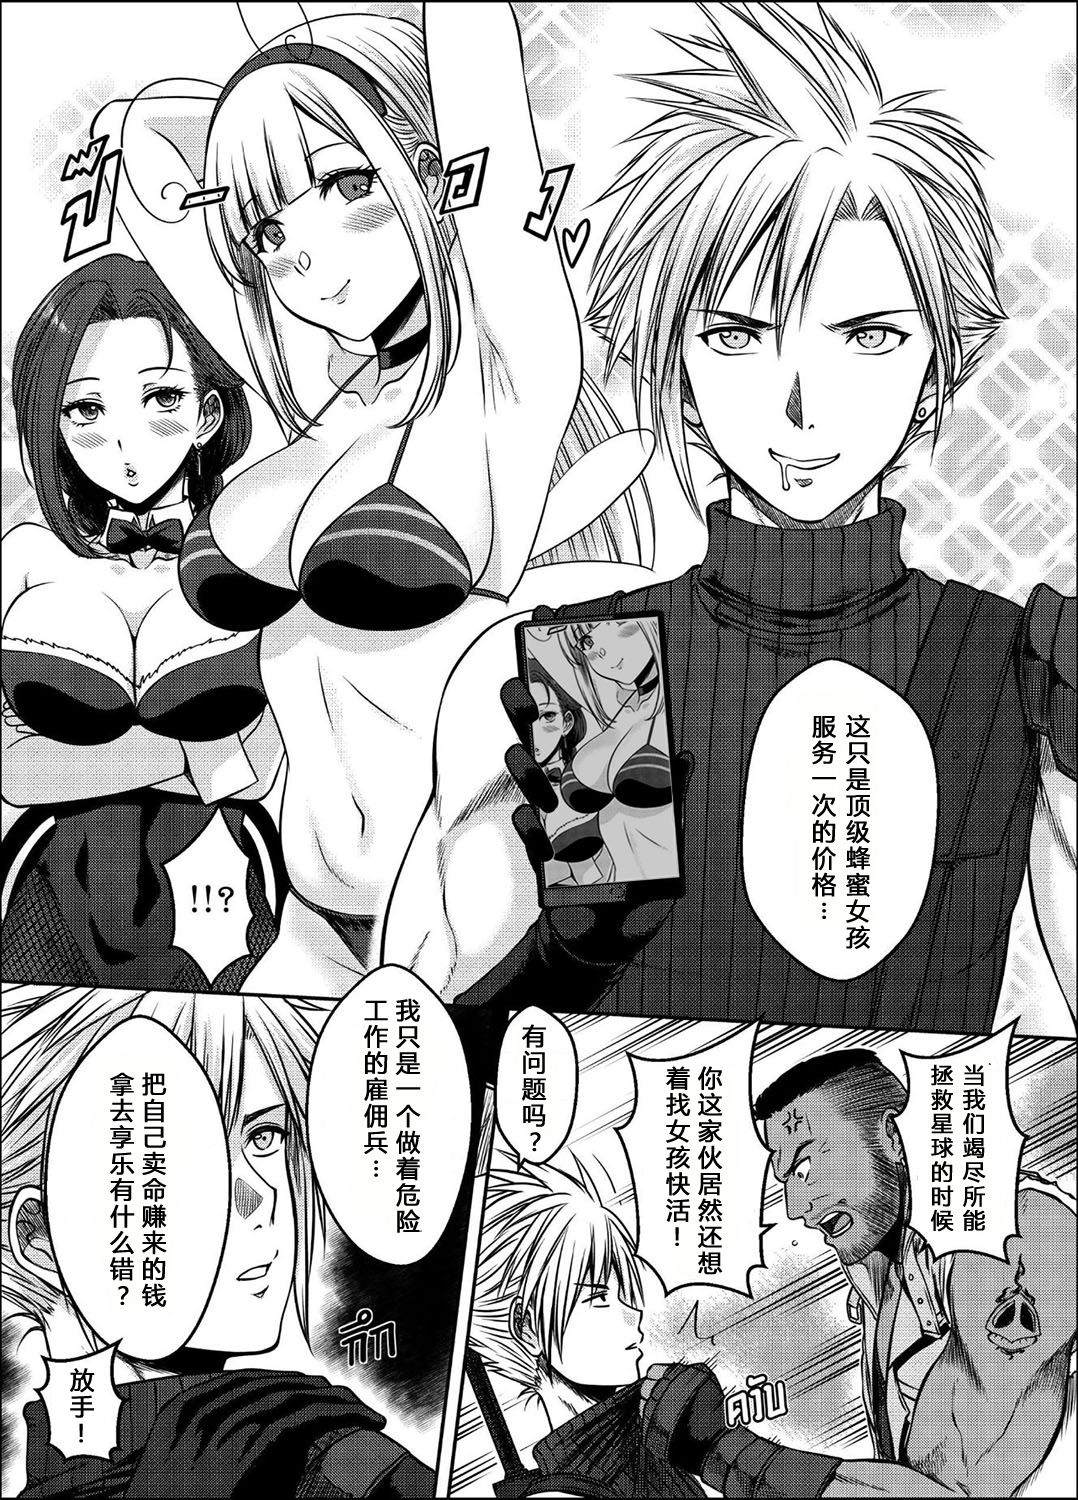 [XTER] OUR [X] PROMISE (Final Fantasy VII) [汉化] page 5 full